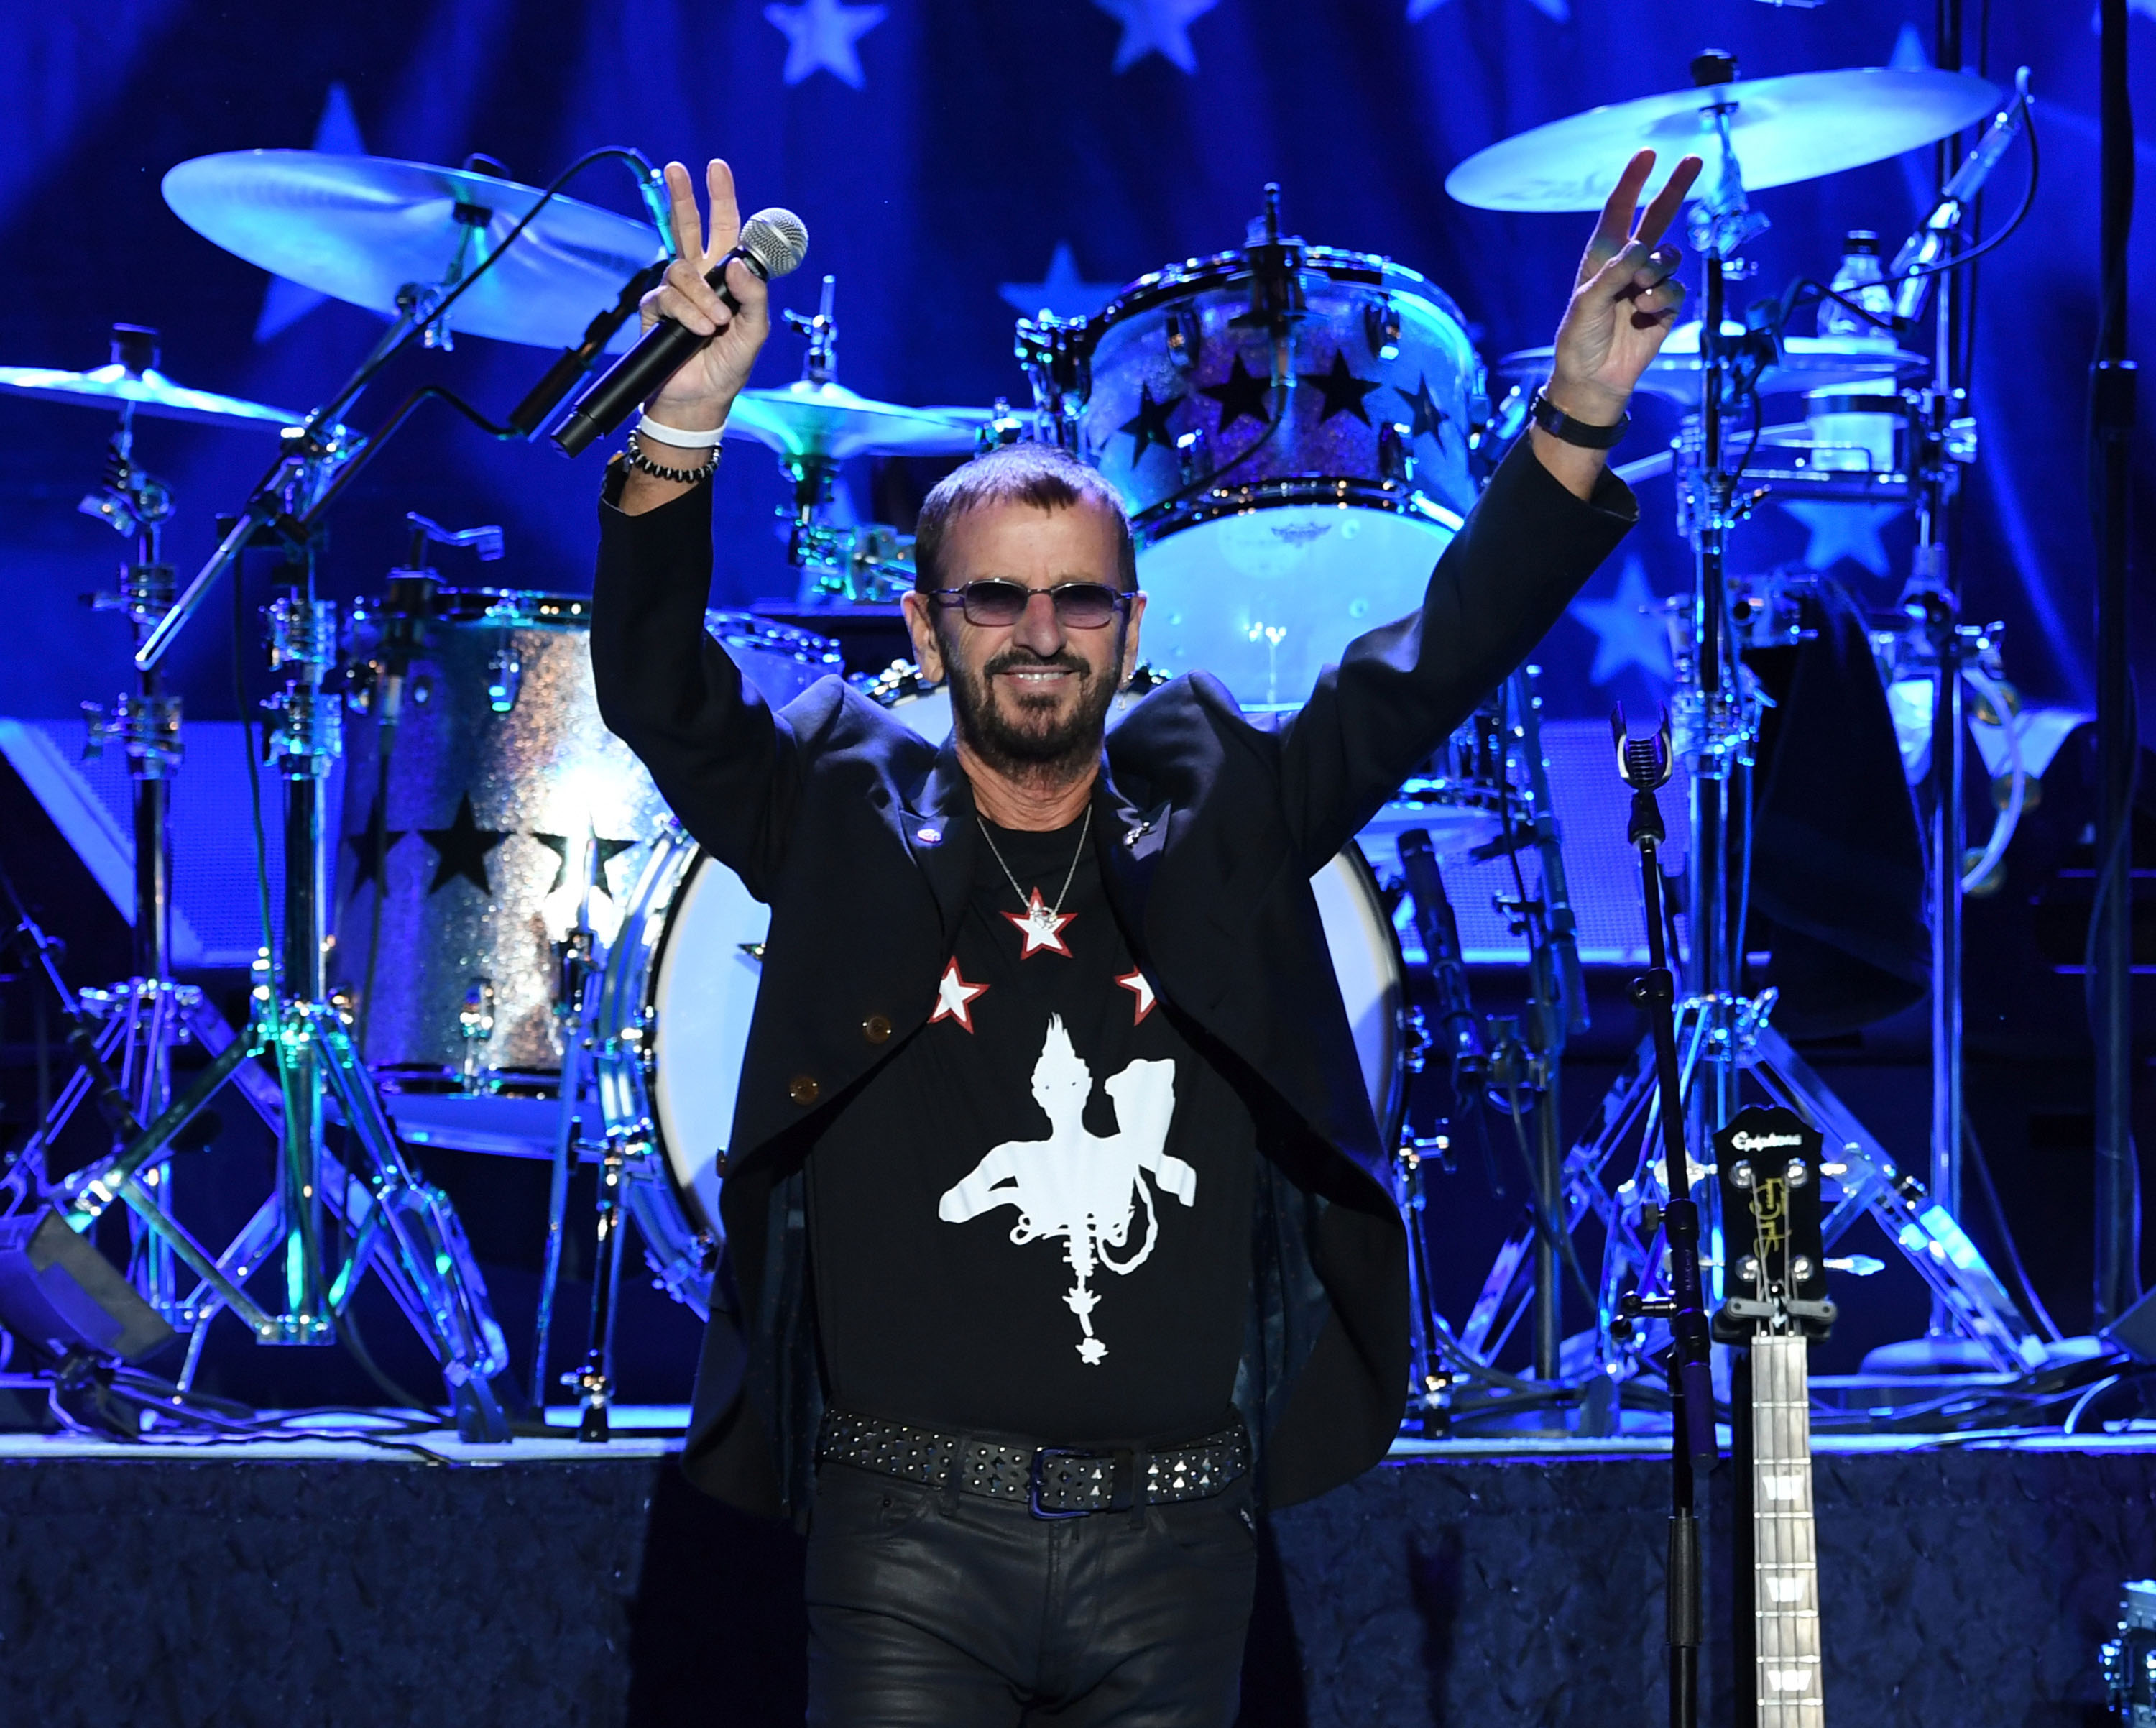 Recording artist Ringo Starr performs at Hollywood Resort & Casino in Las Vegas. (Photo by Denise Truscello/WireImage)